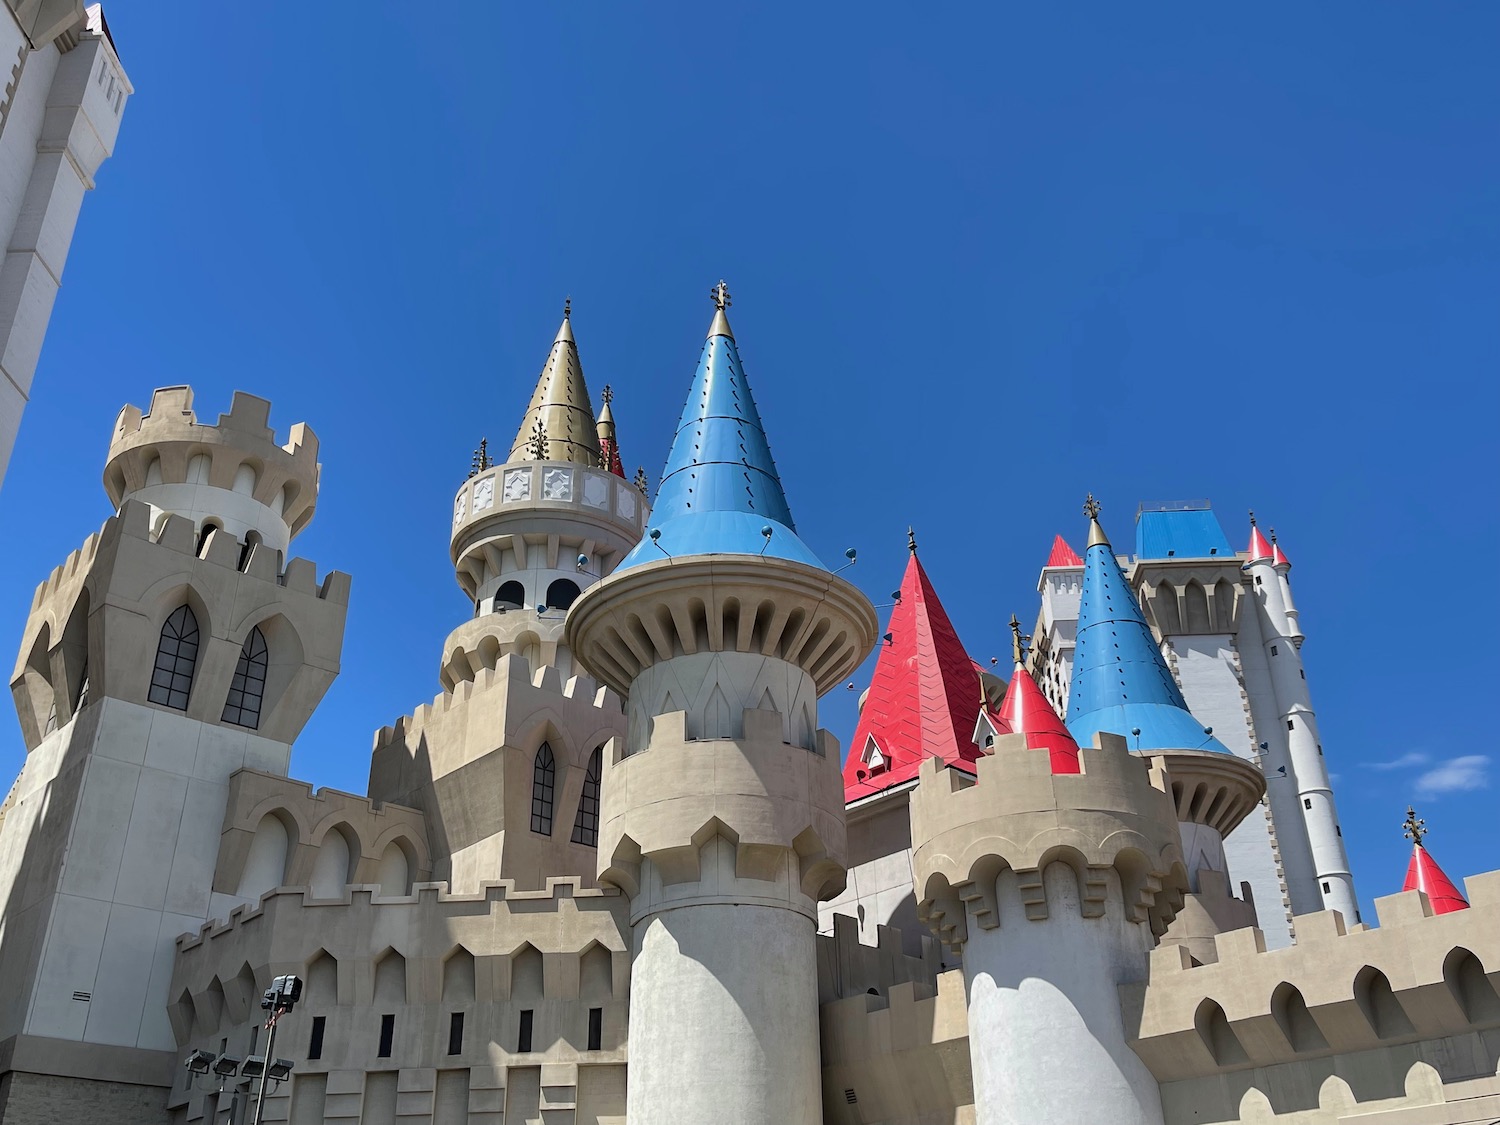 a castle with colorful towers